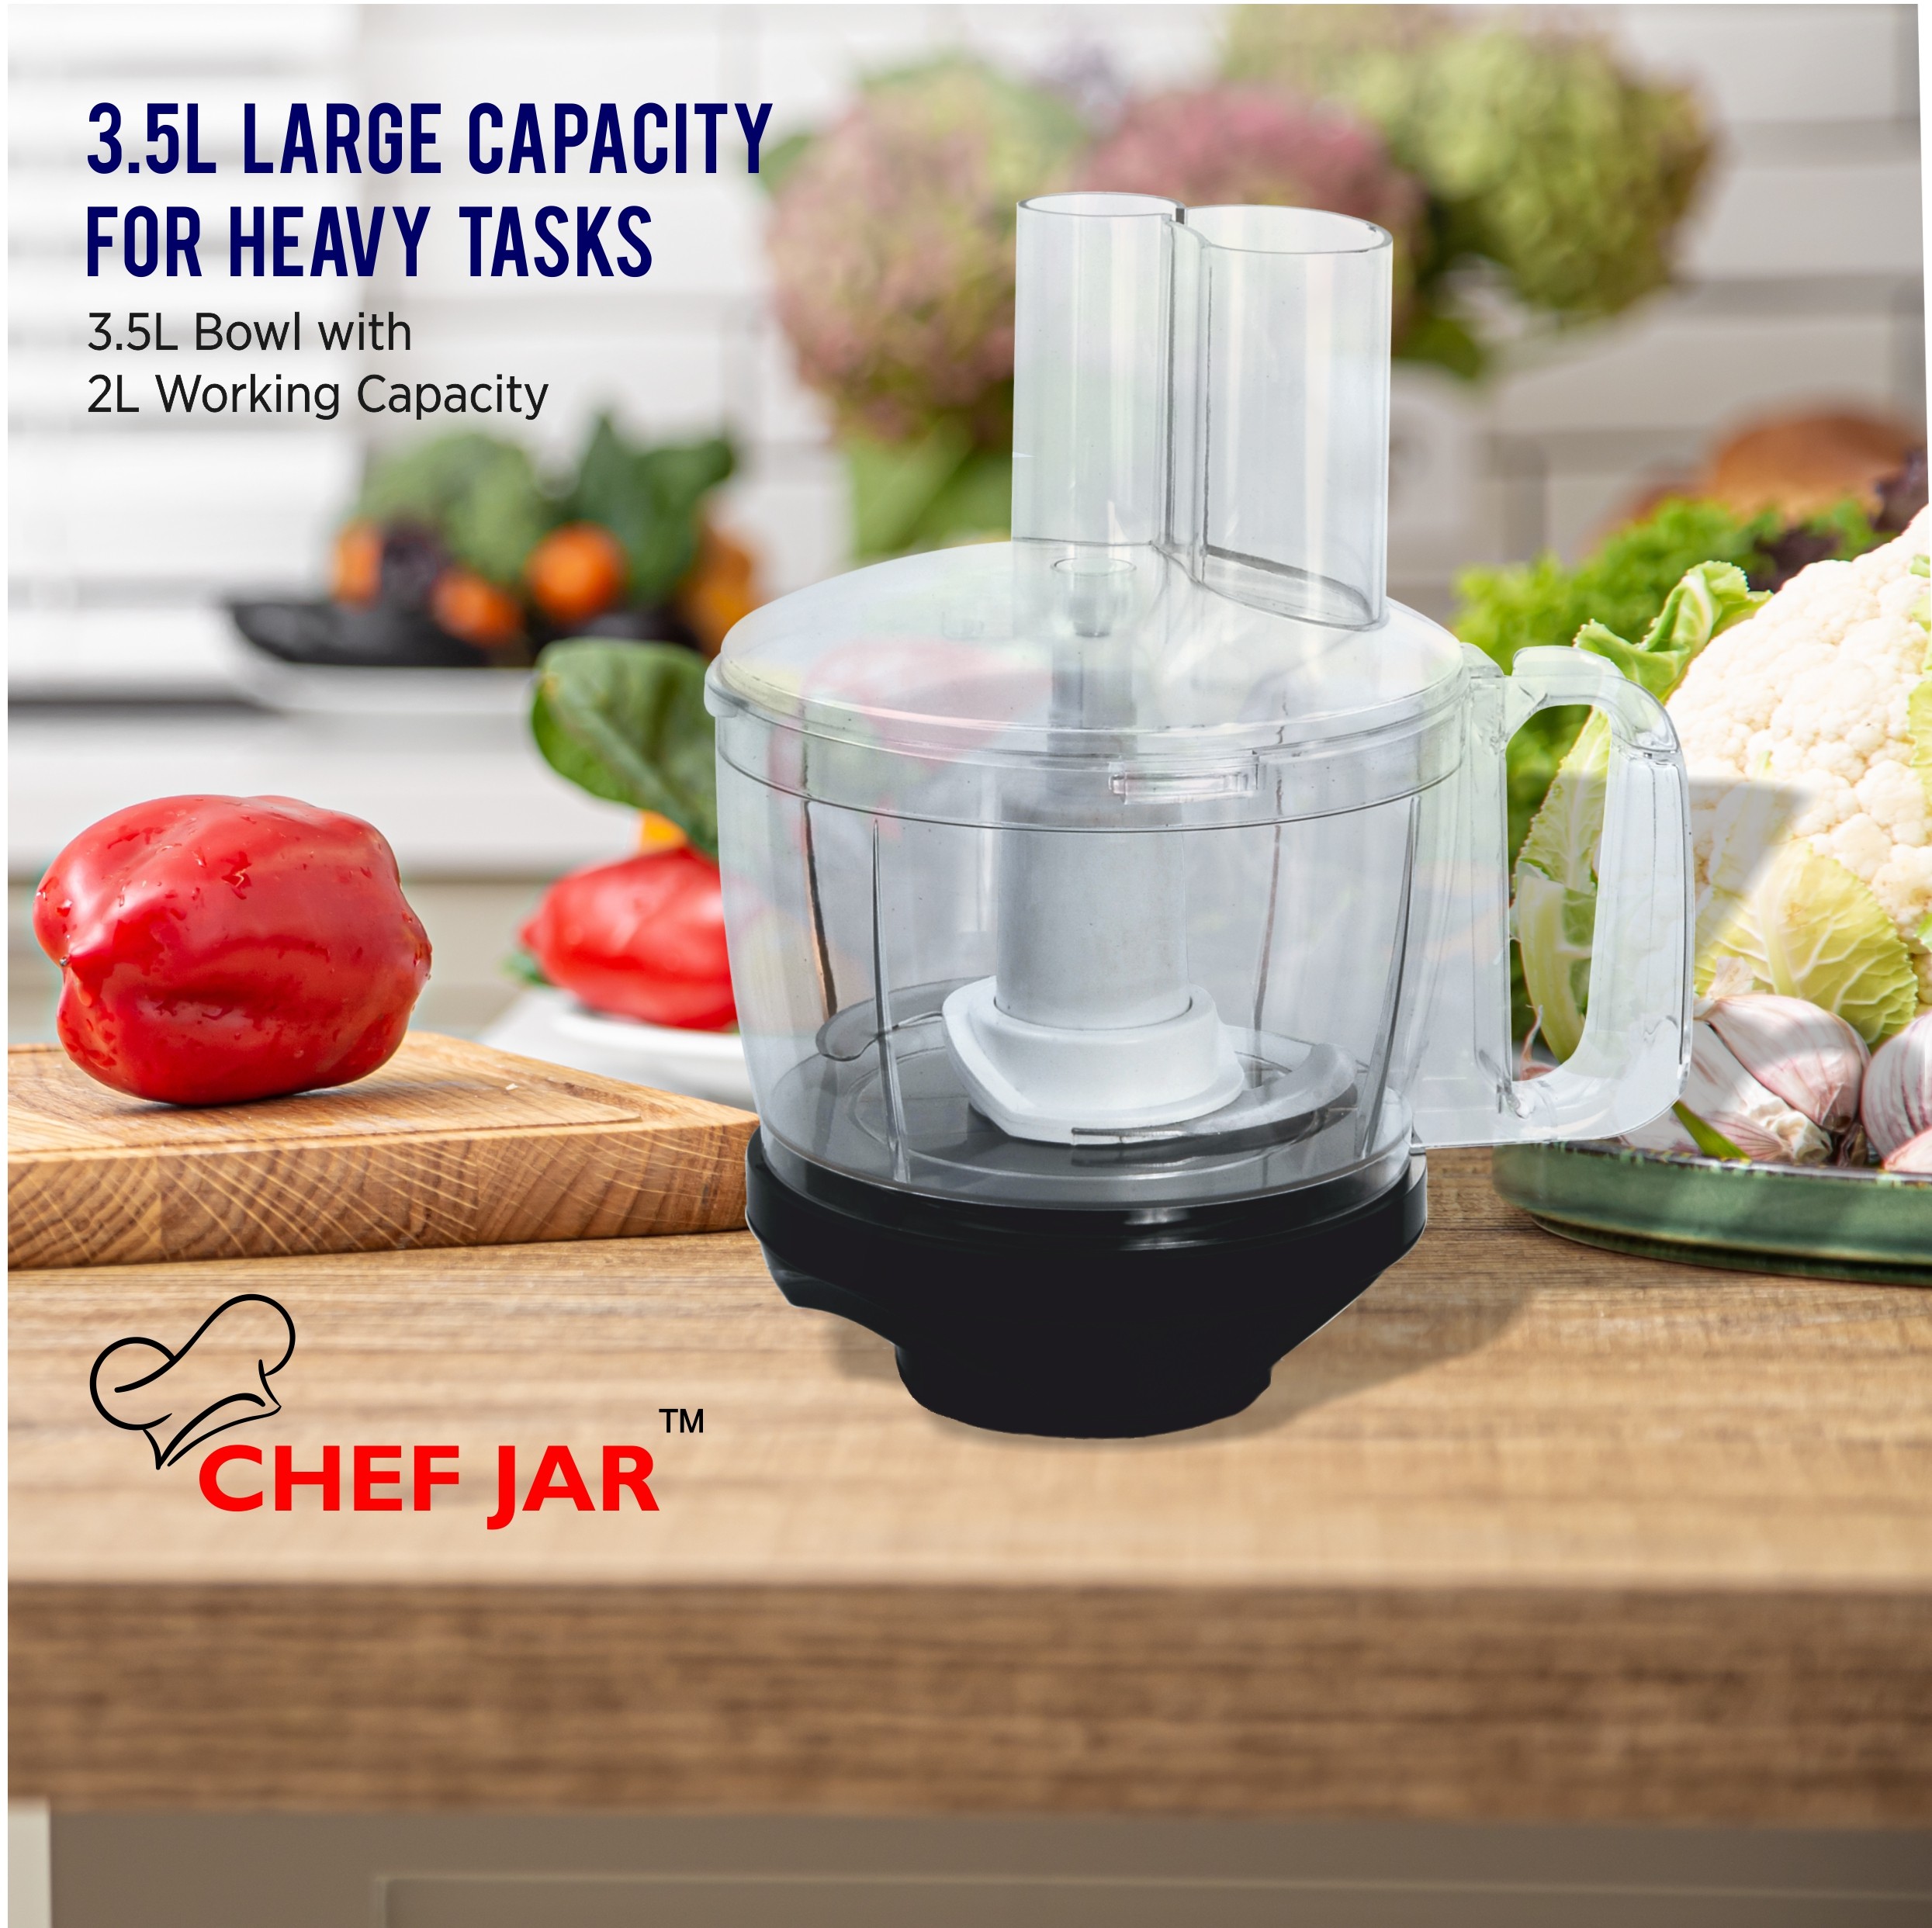 bajaj-classic-pro-600w-indian-mixer-grinder-with-special-chef-jar-stainless-steel-jars-indian-mixer-grinder-spice-coffee-grinder-110v-for-use-in-canada-usa11